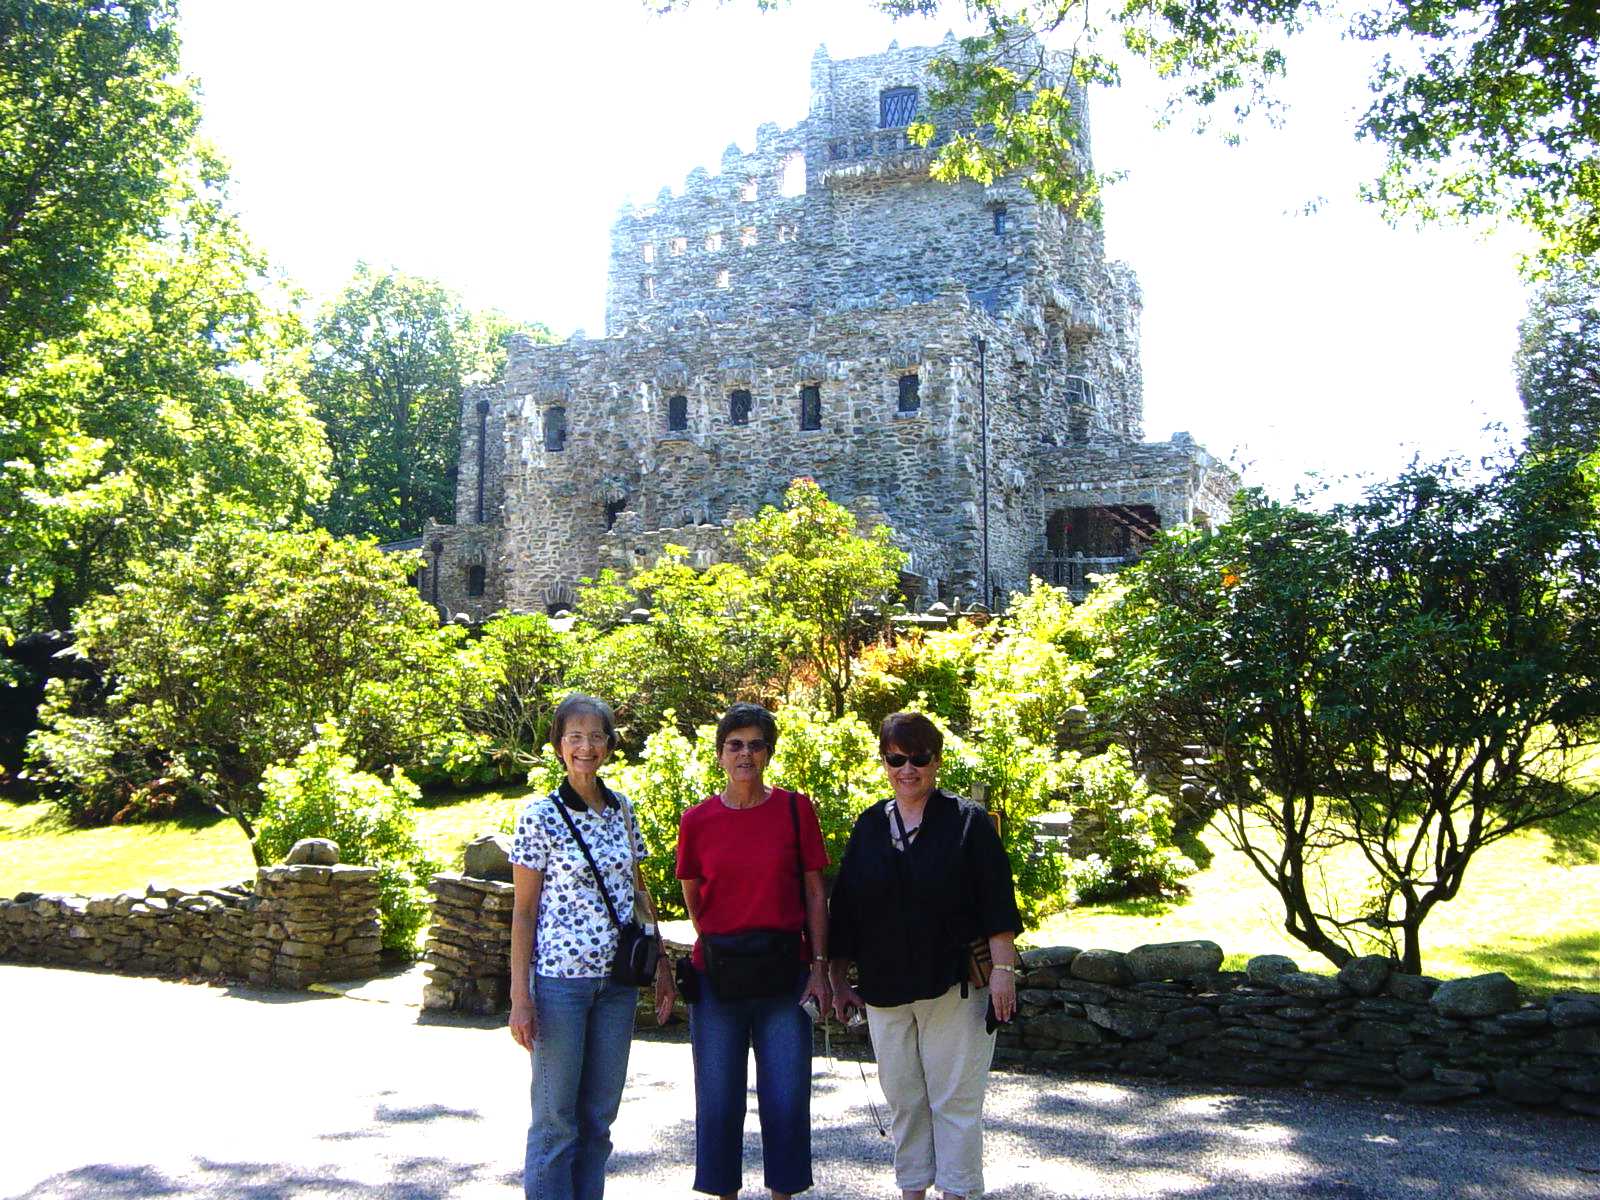 Betty, Evelyn, Theresa at the castle